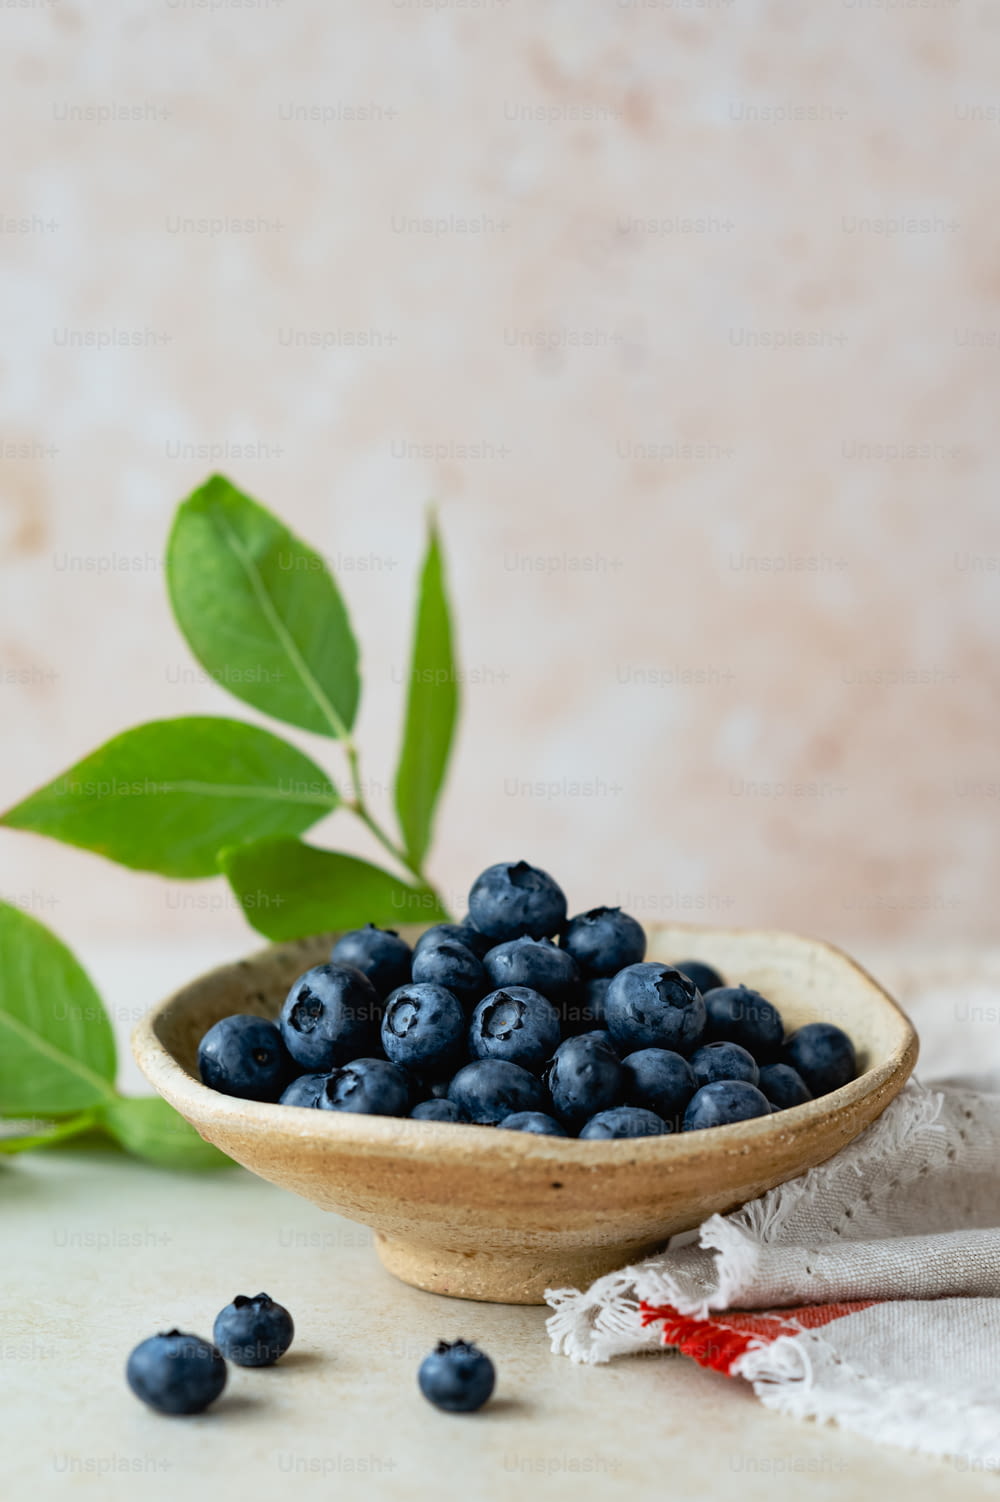 a wooden bowl filled with blueberries next to a green leaf